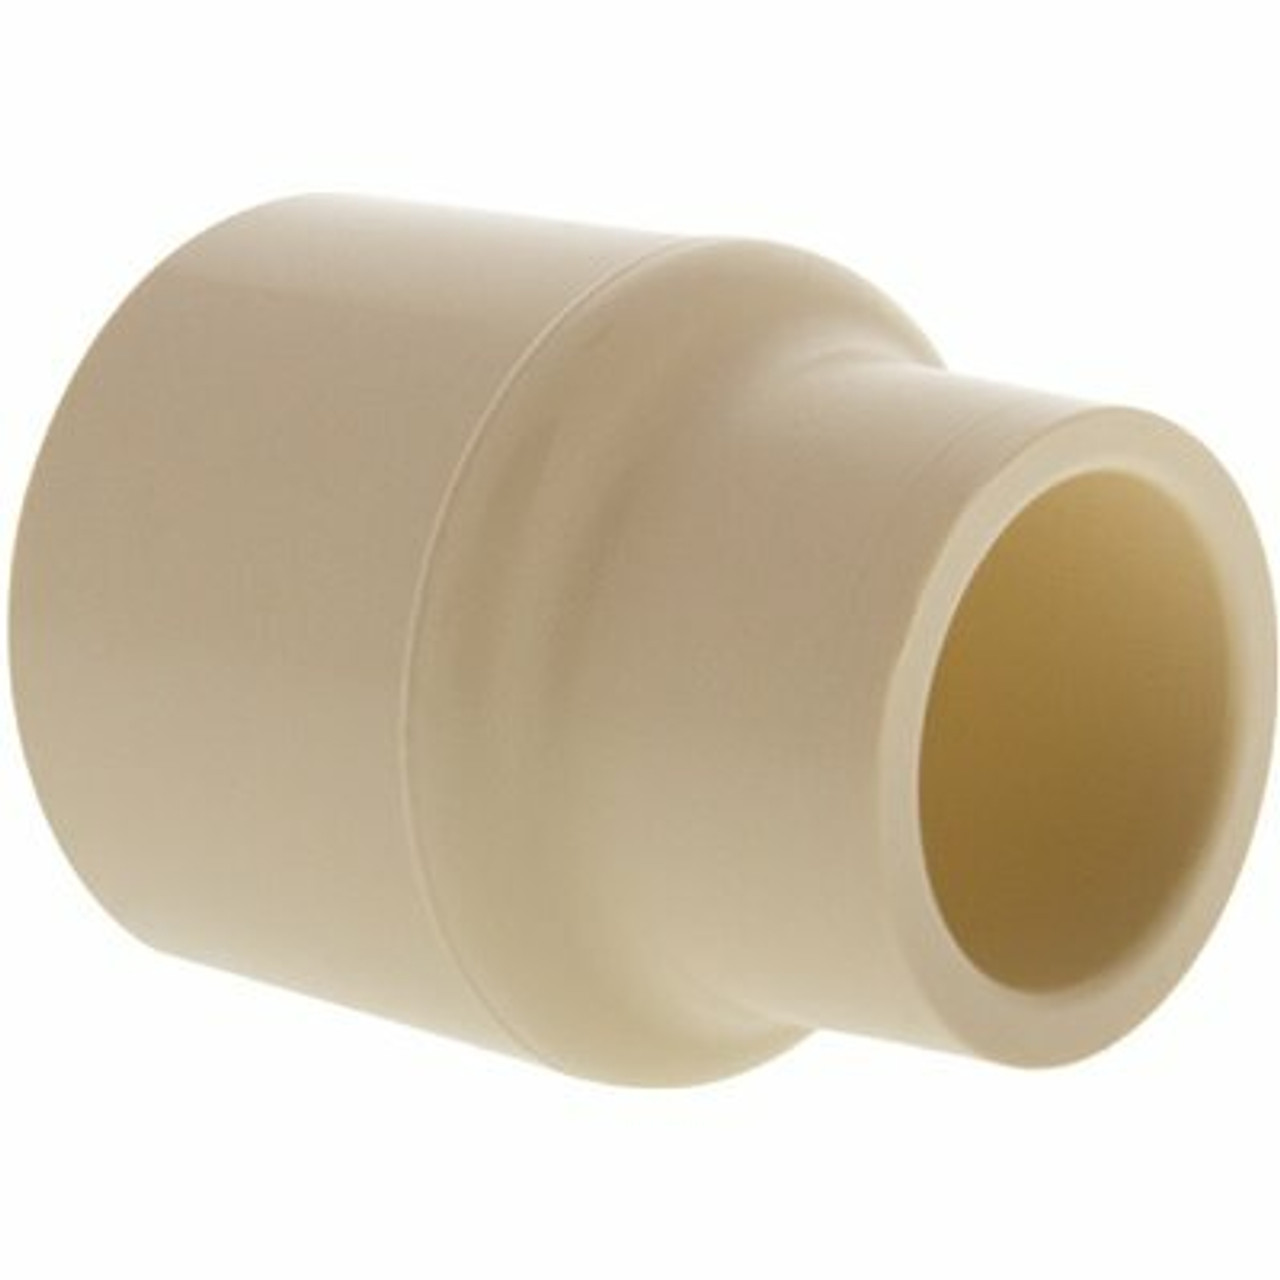 Everbilt 3/4 In. X 1/2 In. Cpvc-Cts Slip X Slip Reducer Coupling Fitting